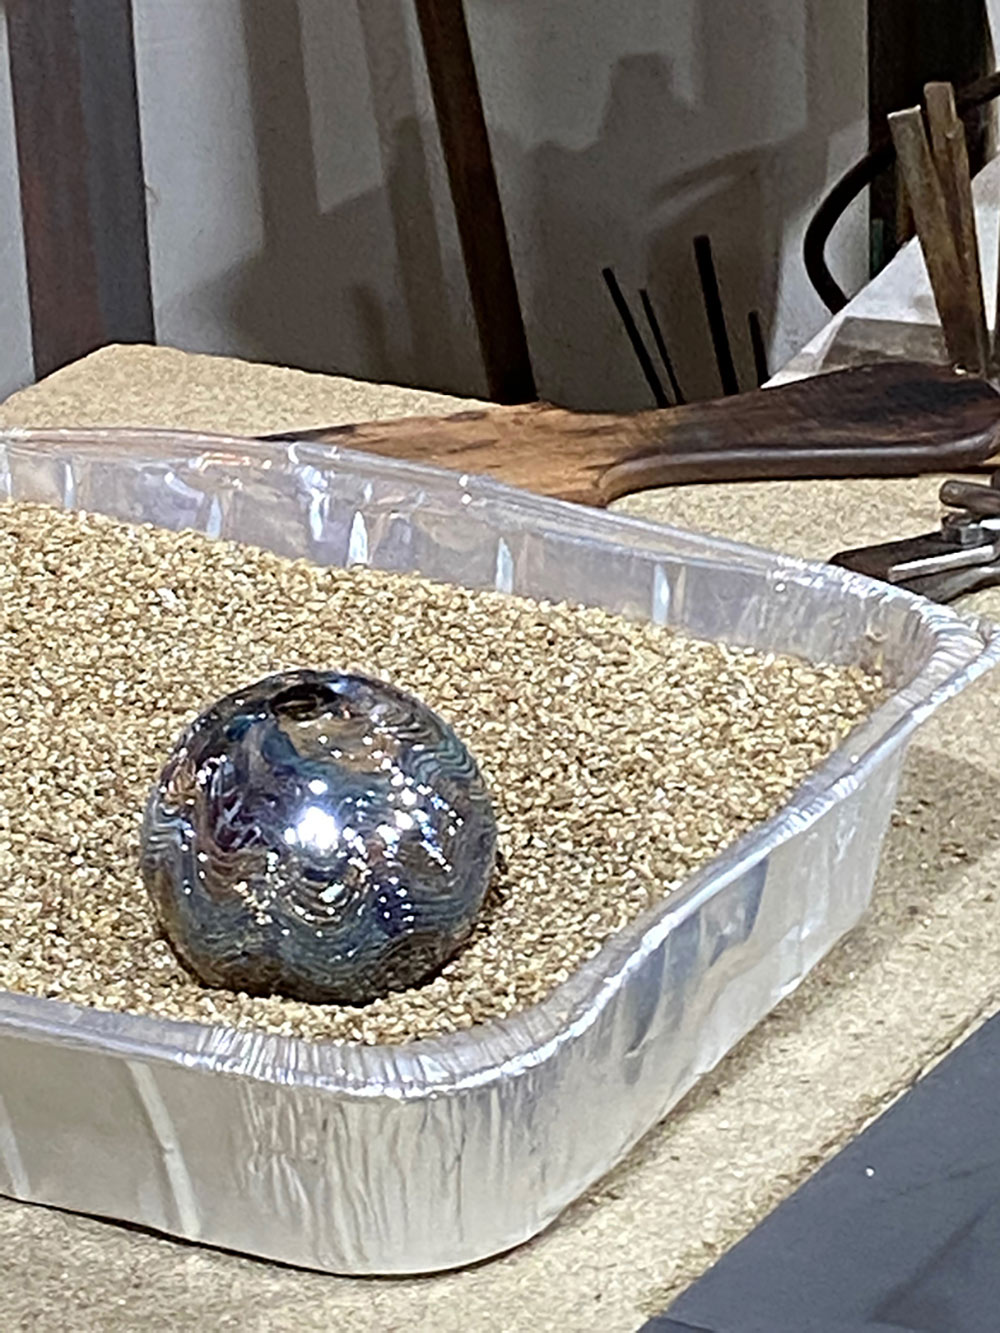 glass ornament sits in container of what looks like kitty litter